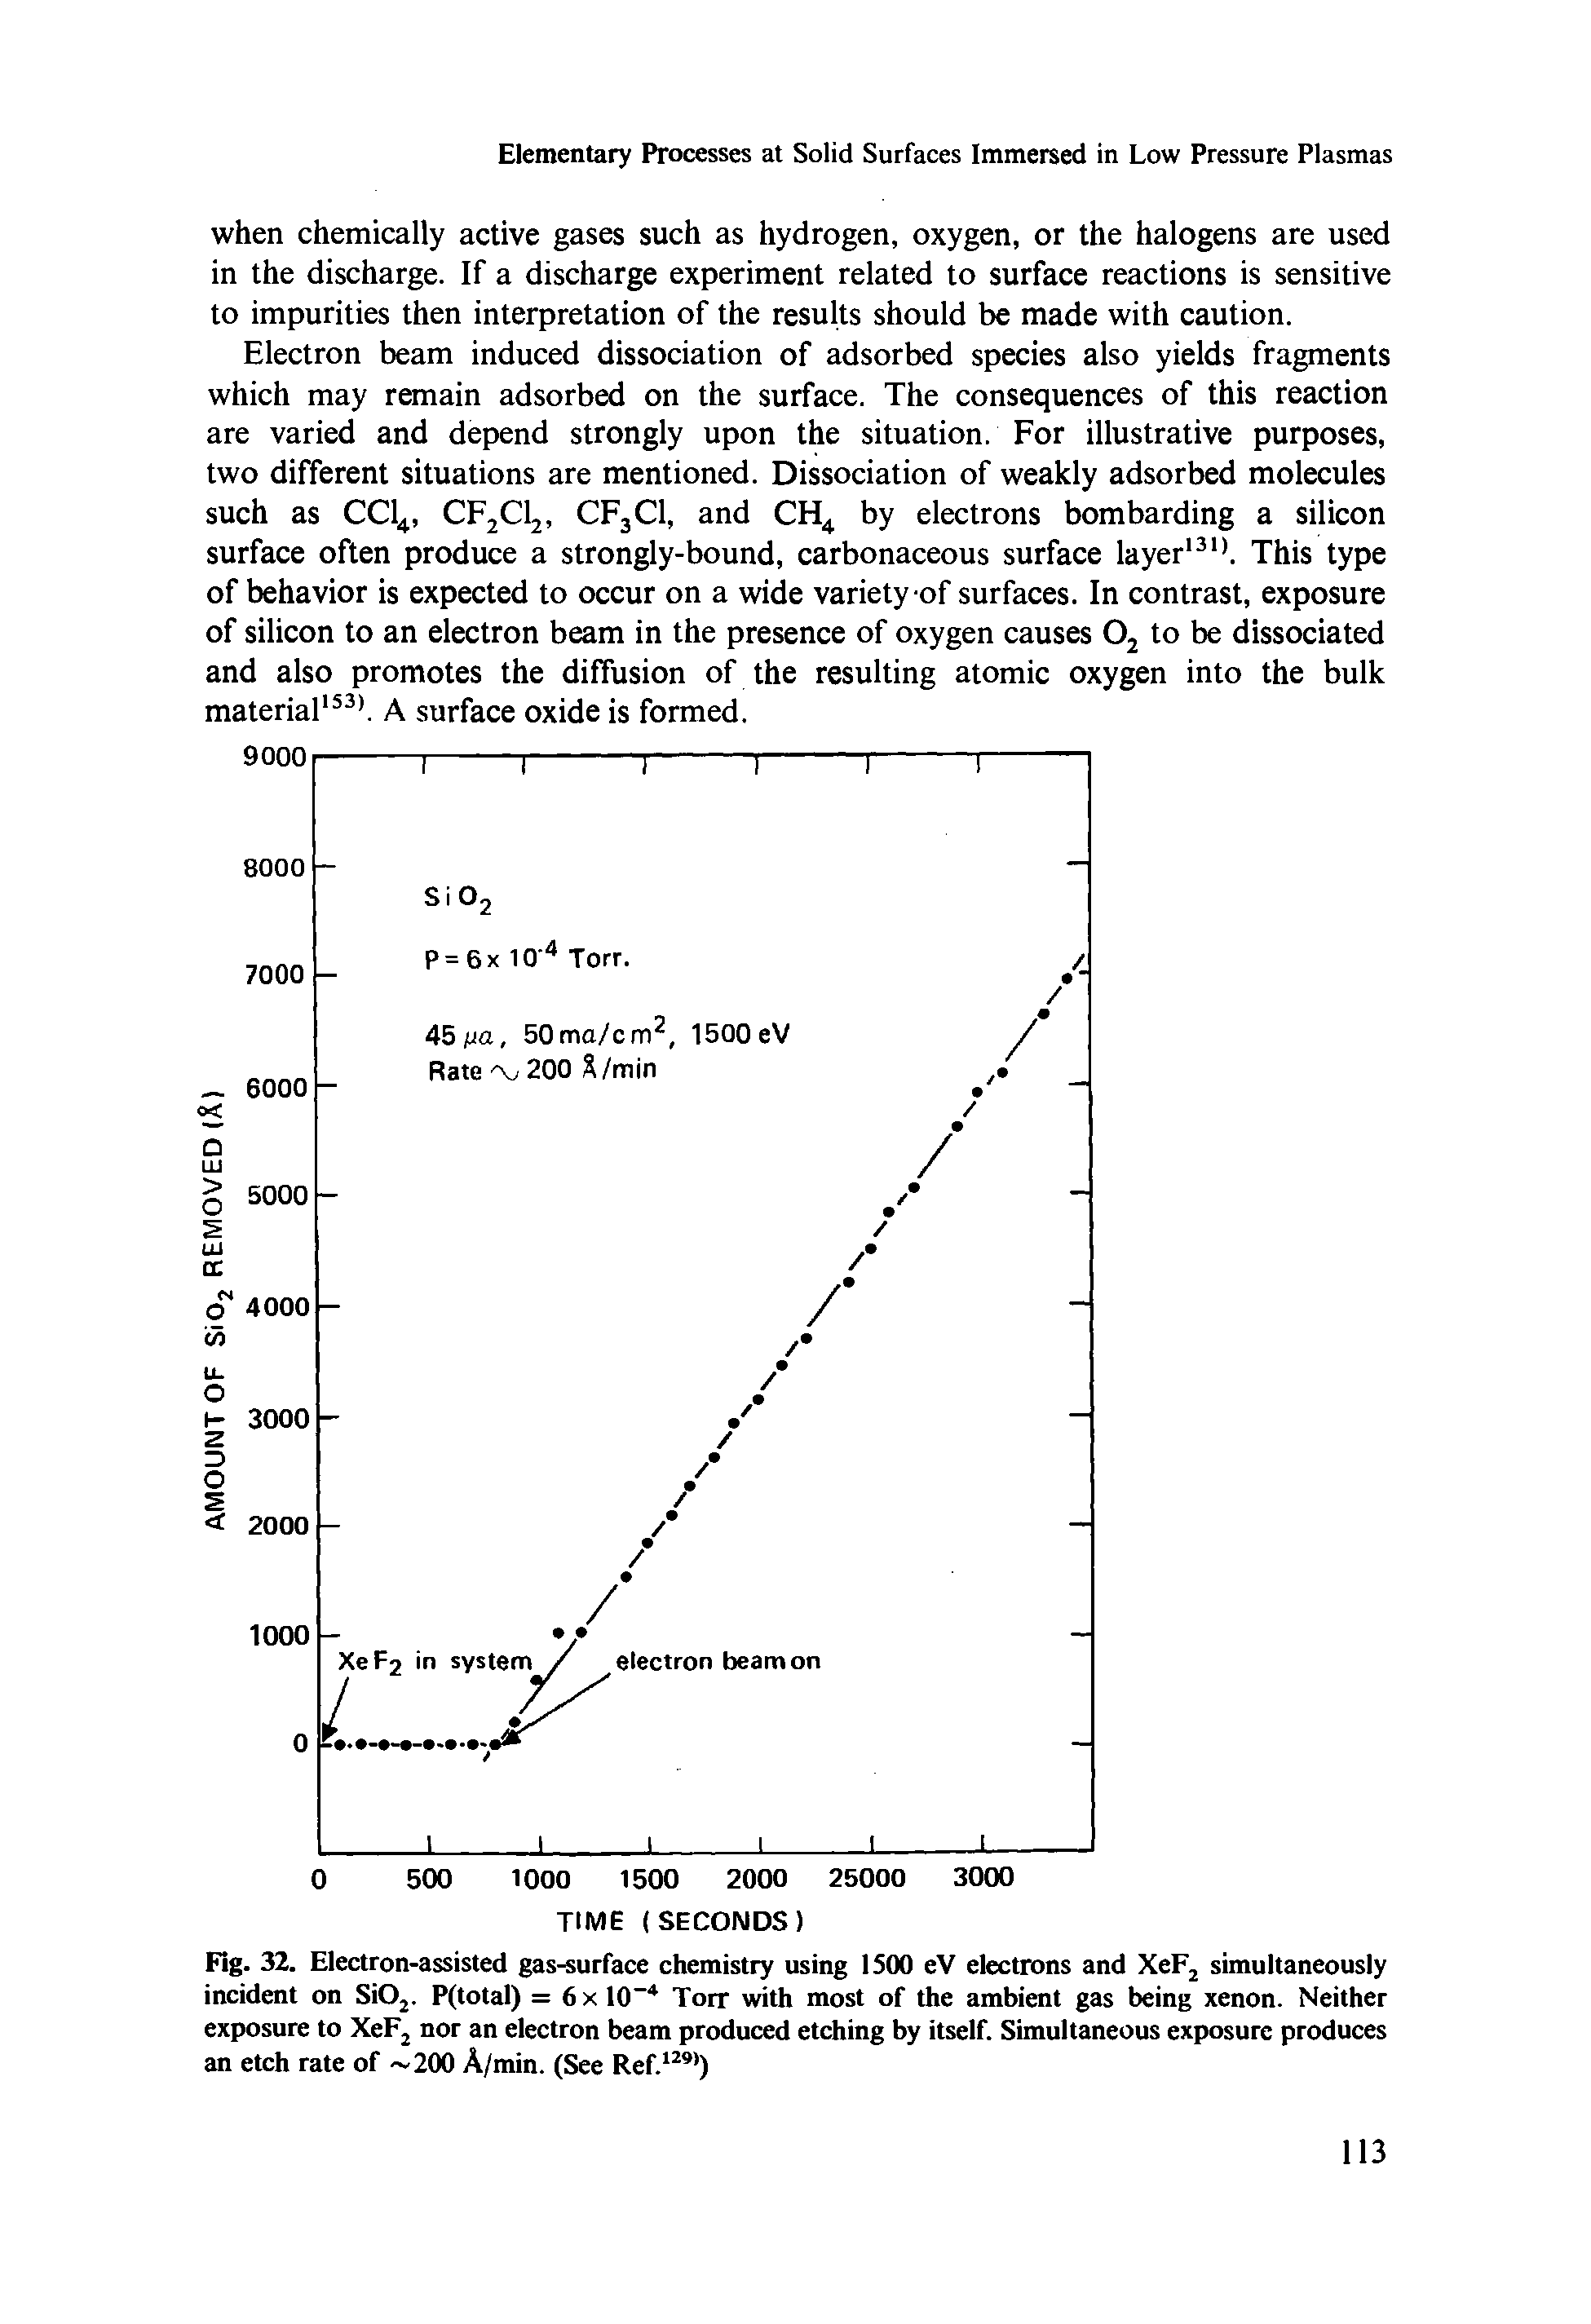 Fig. 32. Electron-assisted gas-surface chemistry using 1500 eV electrons and XeFj simultaneously incident on SiOj. P(total) = 6x 10 Torr with most of the ambient gas being xenon. Neither exposure to XeF nor an electron beam produced etching by itself. Simultaneous exposure produces an etch rate of 200 A/min. (See Ref. )...